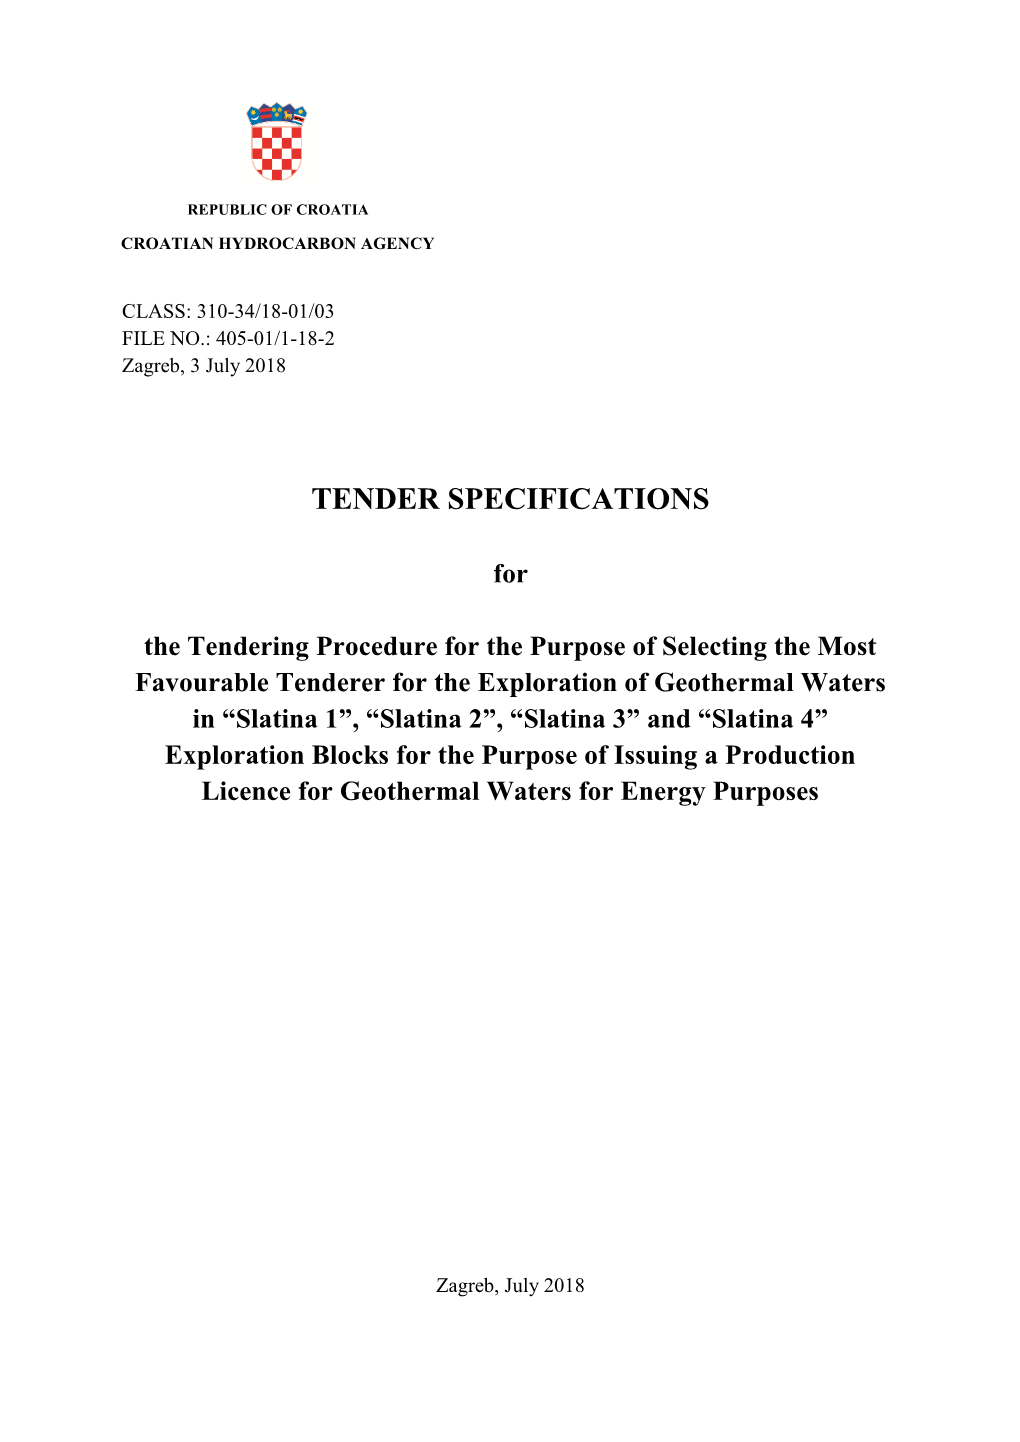 Tender Specifications